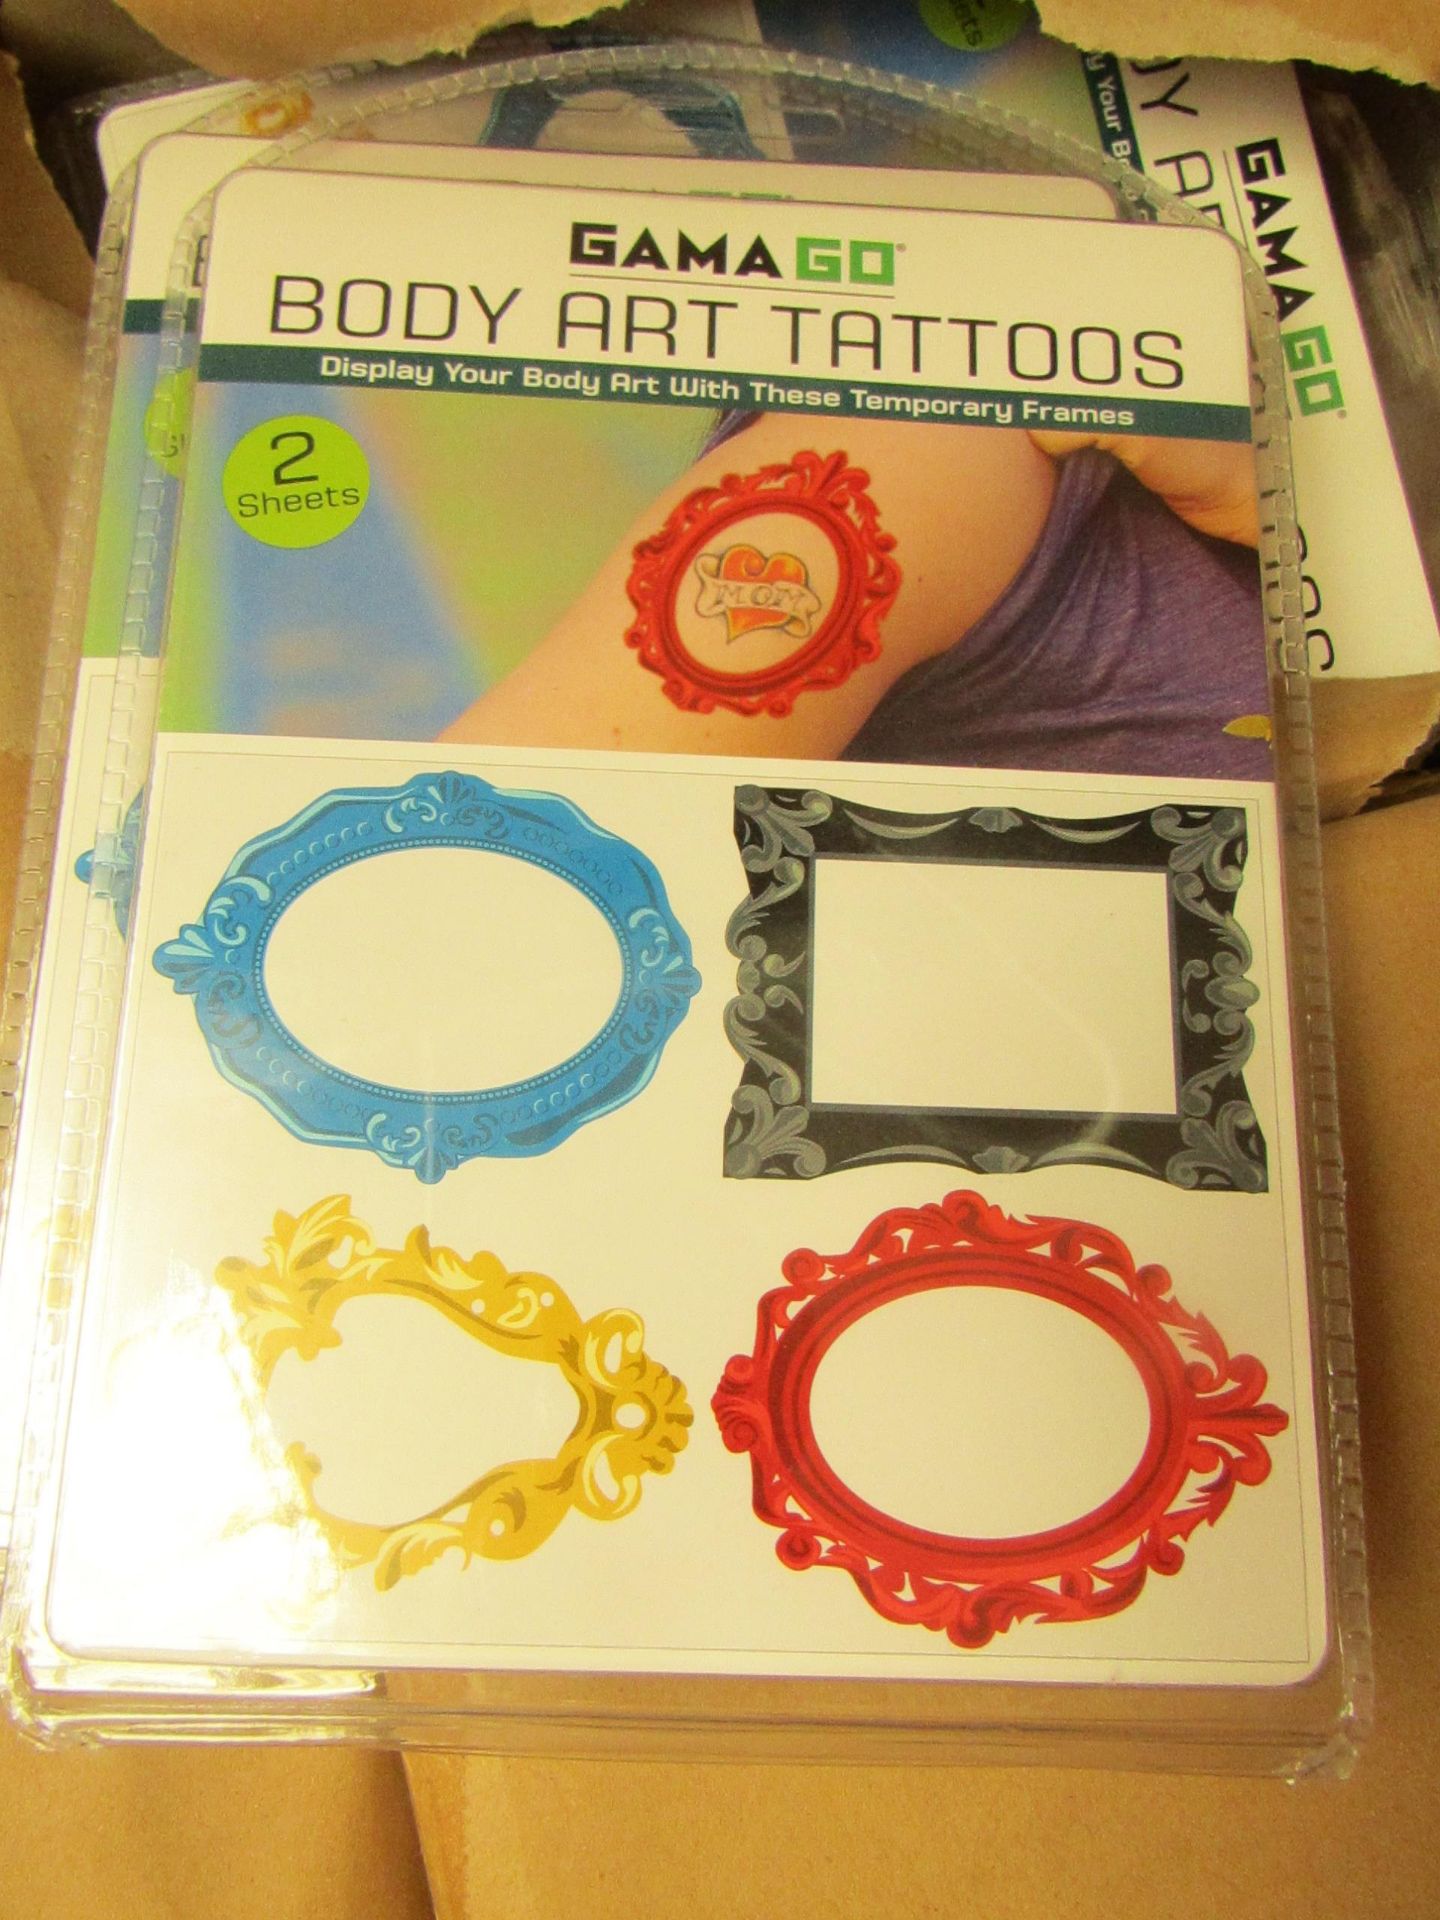 10 x Packs of 2 Sheets Body Art tattoos. New & packaged